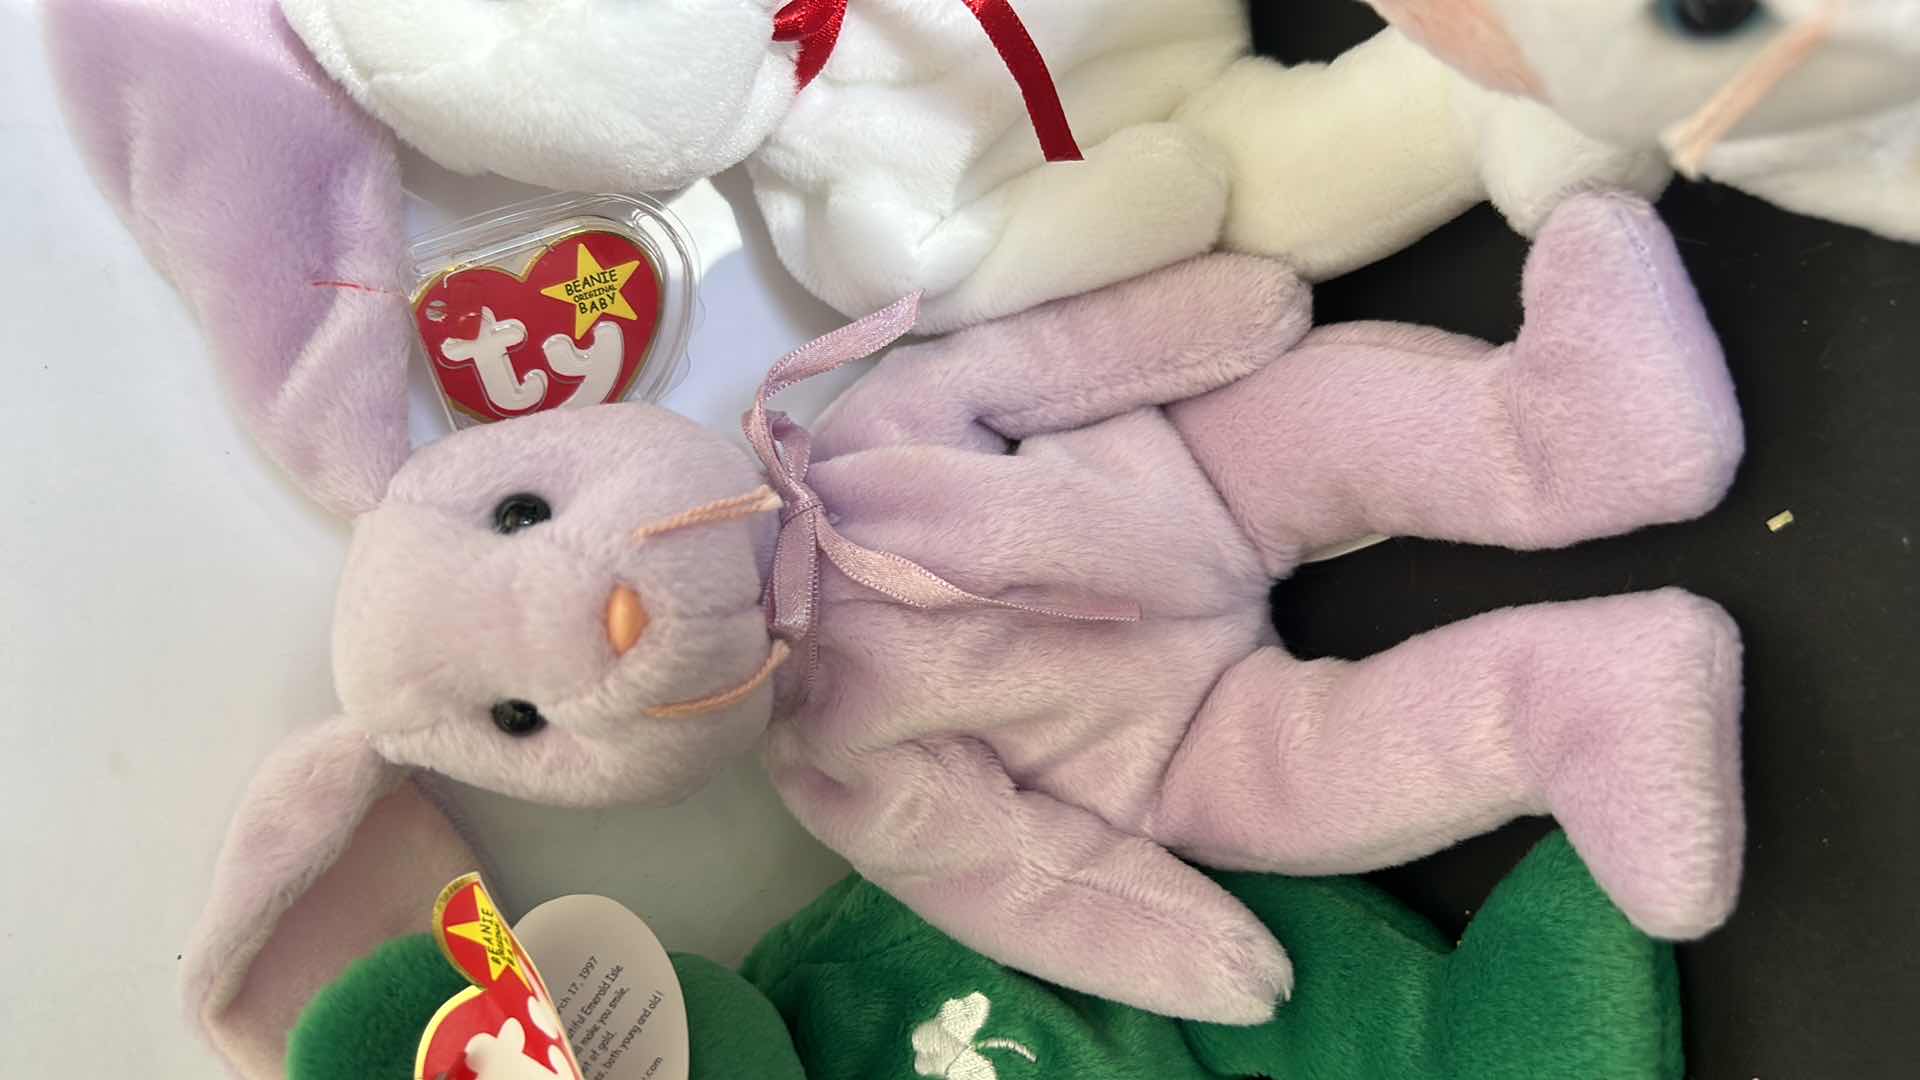 Photo 6 of 8 COLLECTIBLE BEANIE BABIES INCLUDES RARE PRINCESS BEANIE BABY)